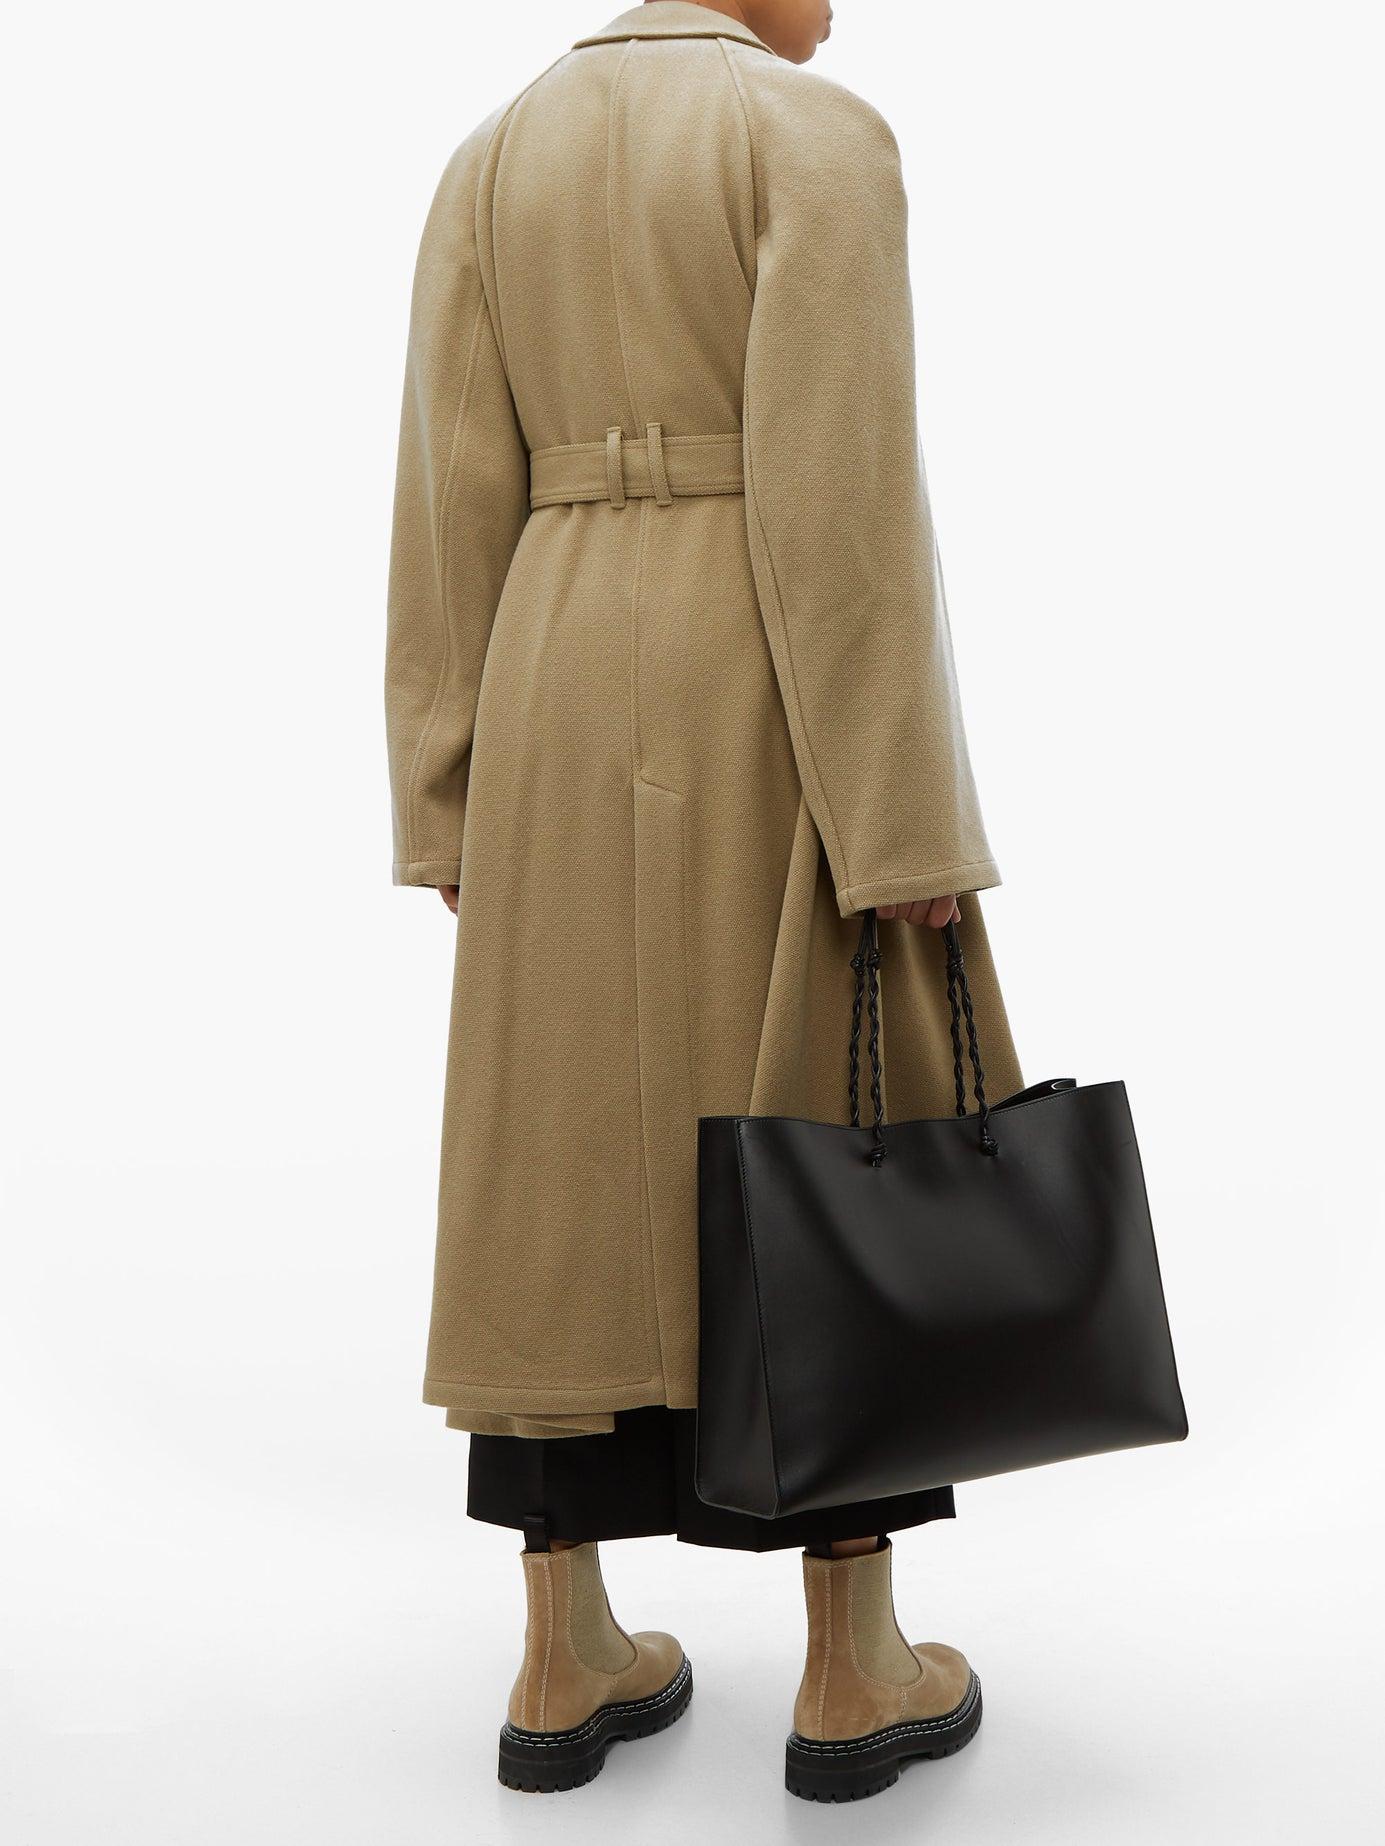 Lemaire Oversized Point Collar Wool Coat in Camel (Natural) - Lyst